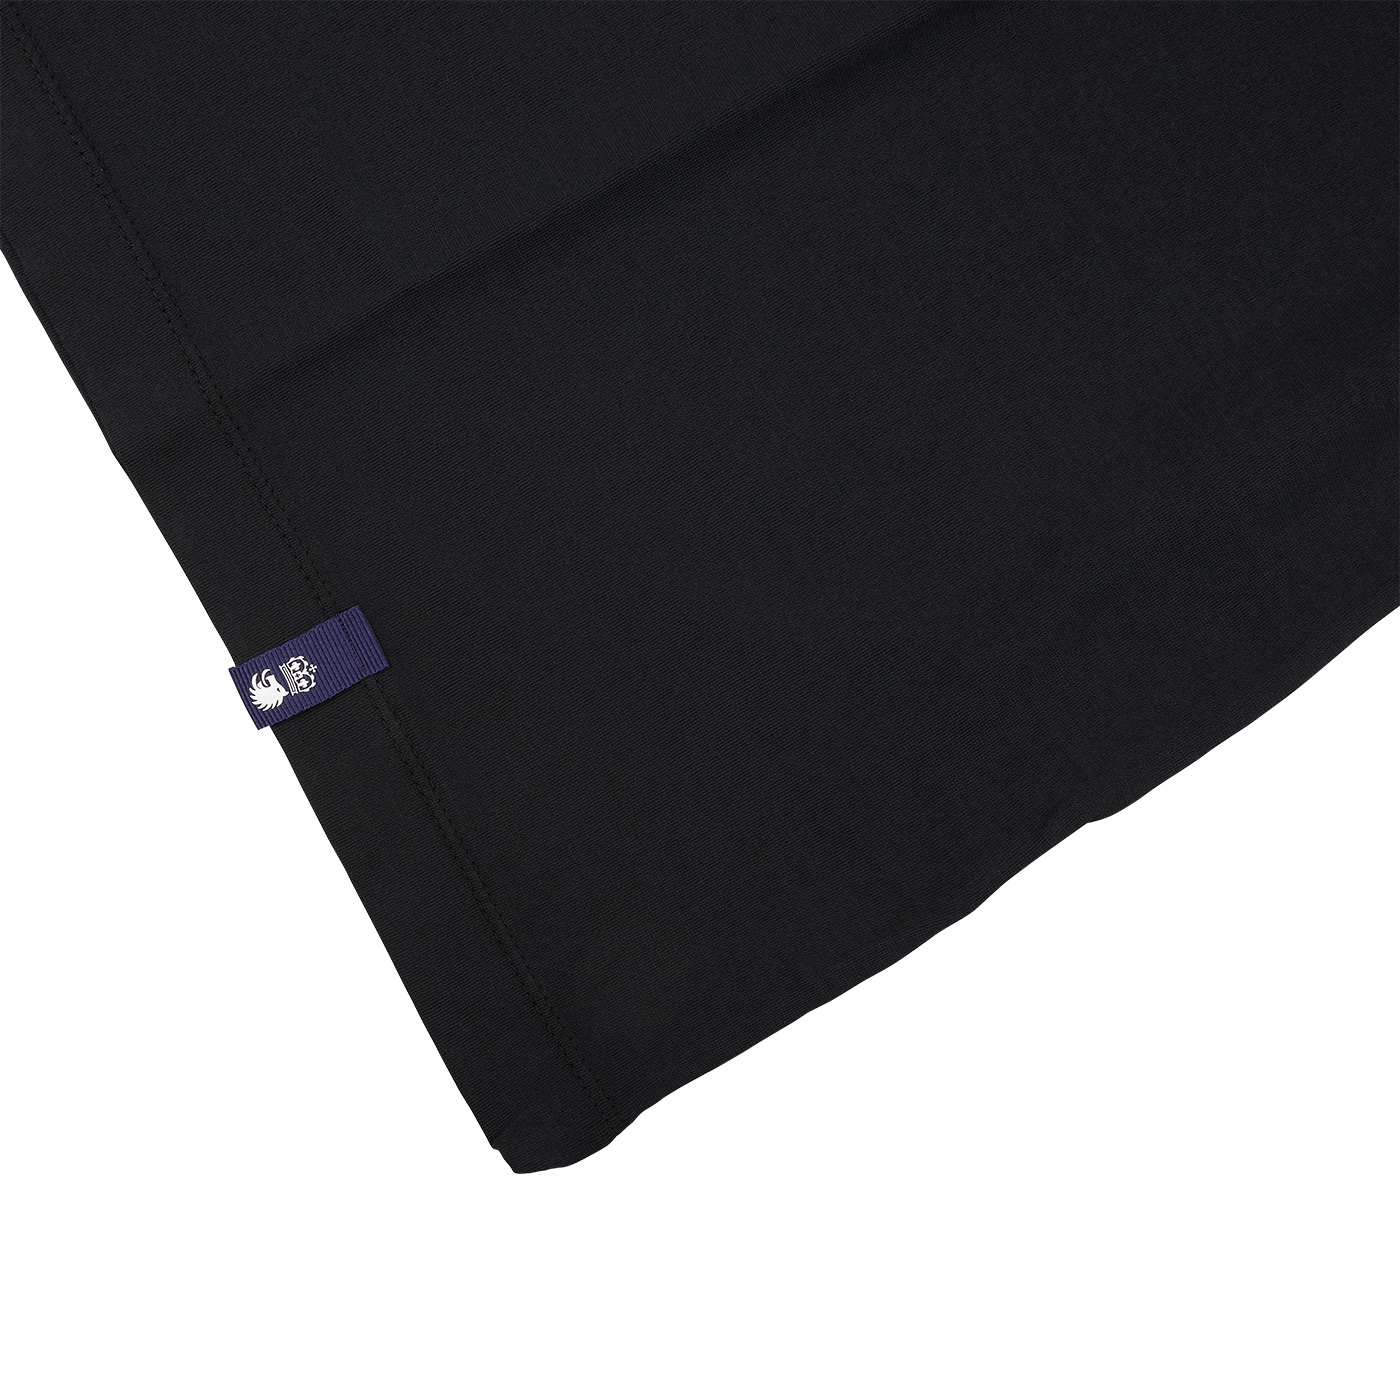 A Black Ice Cotton LS T-Shirt with a purple logo from Italy by Drumohr.